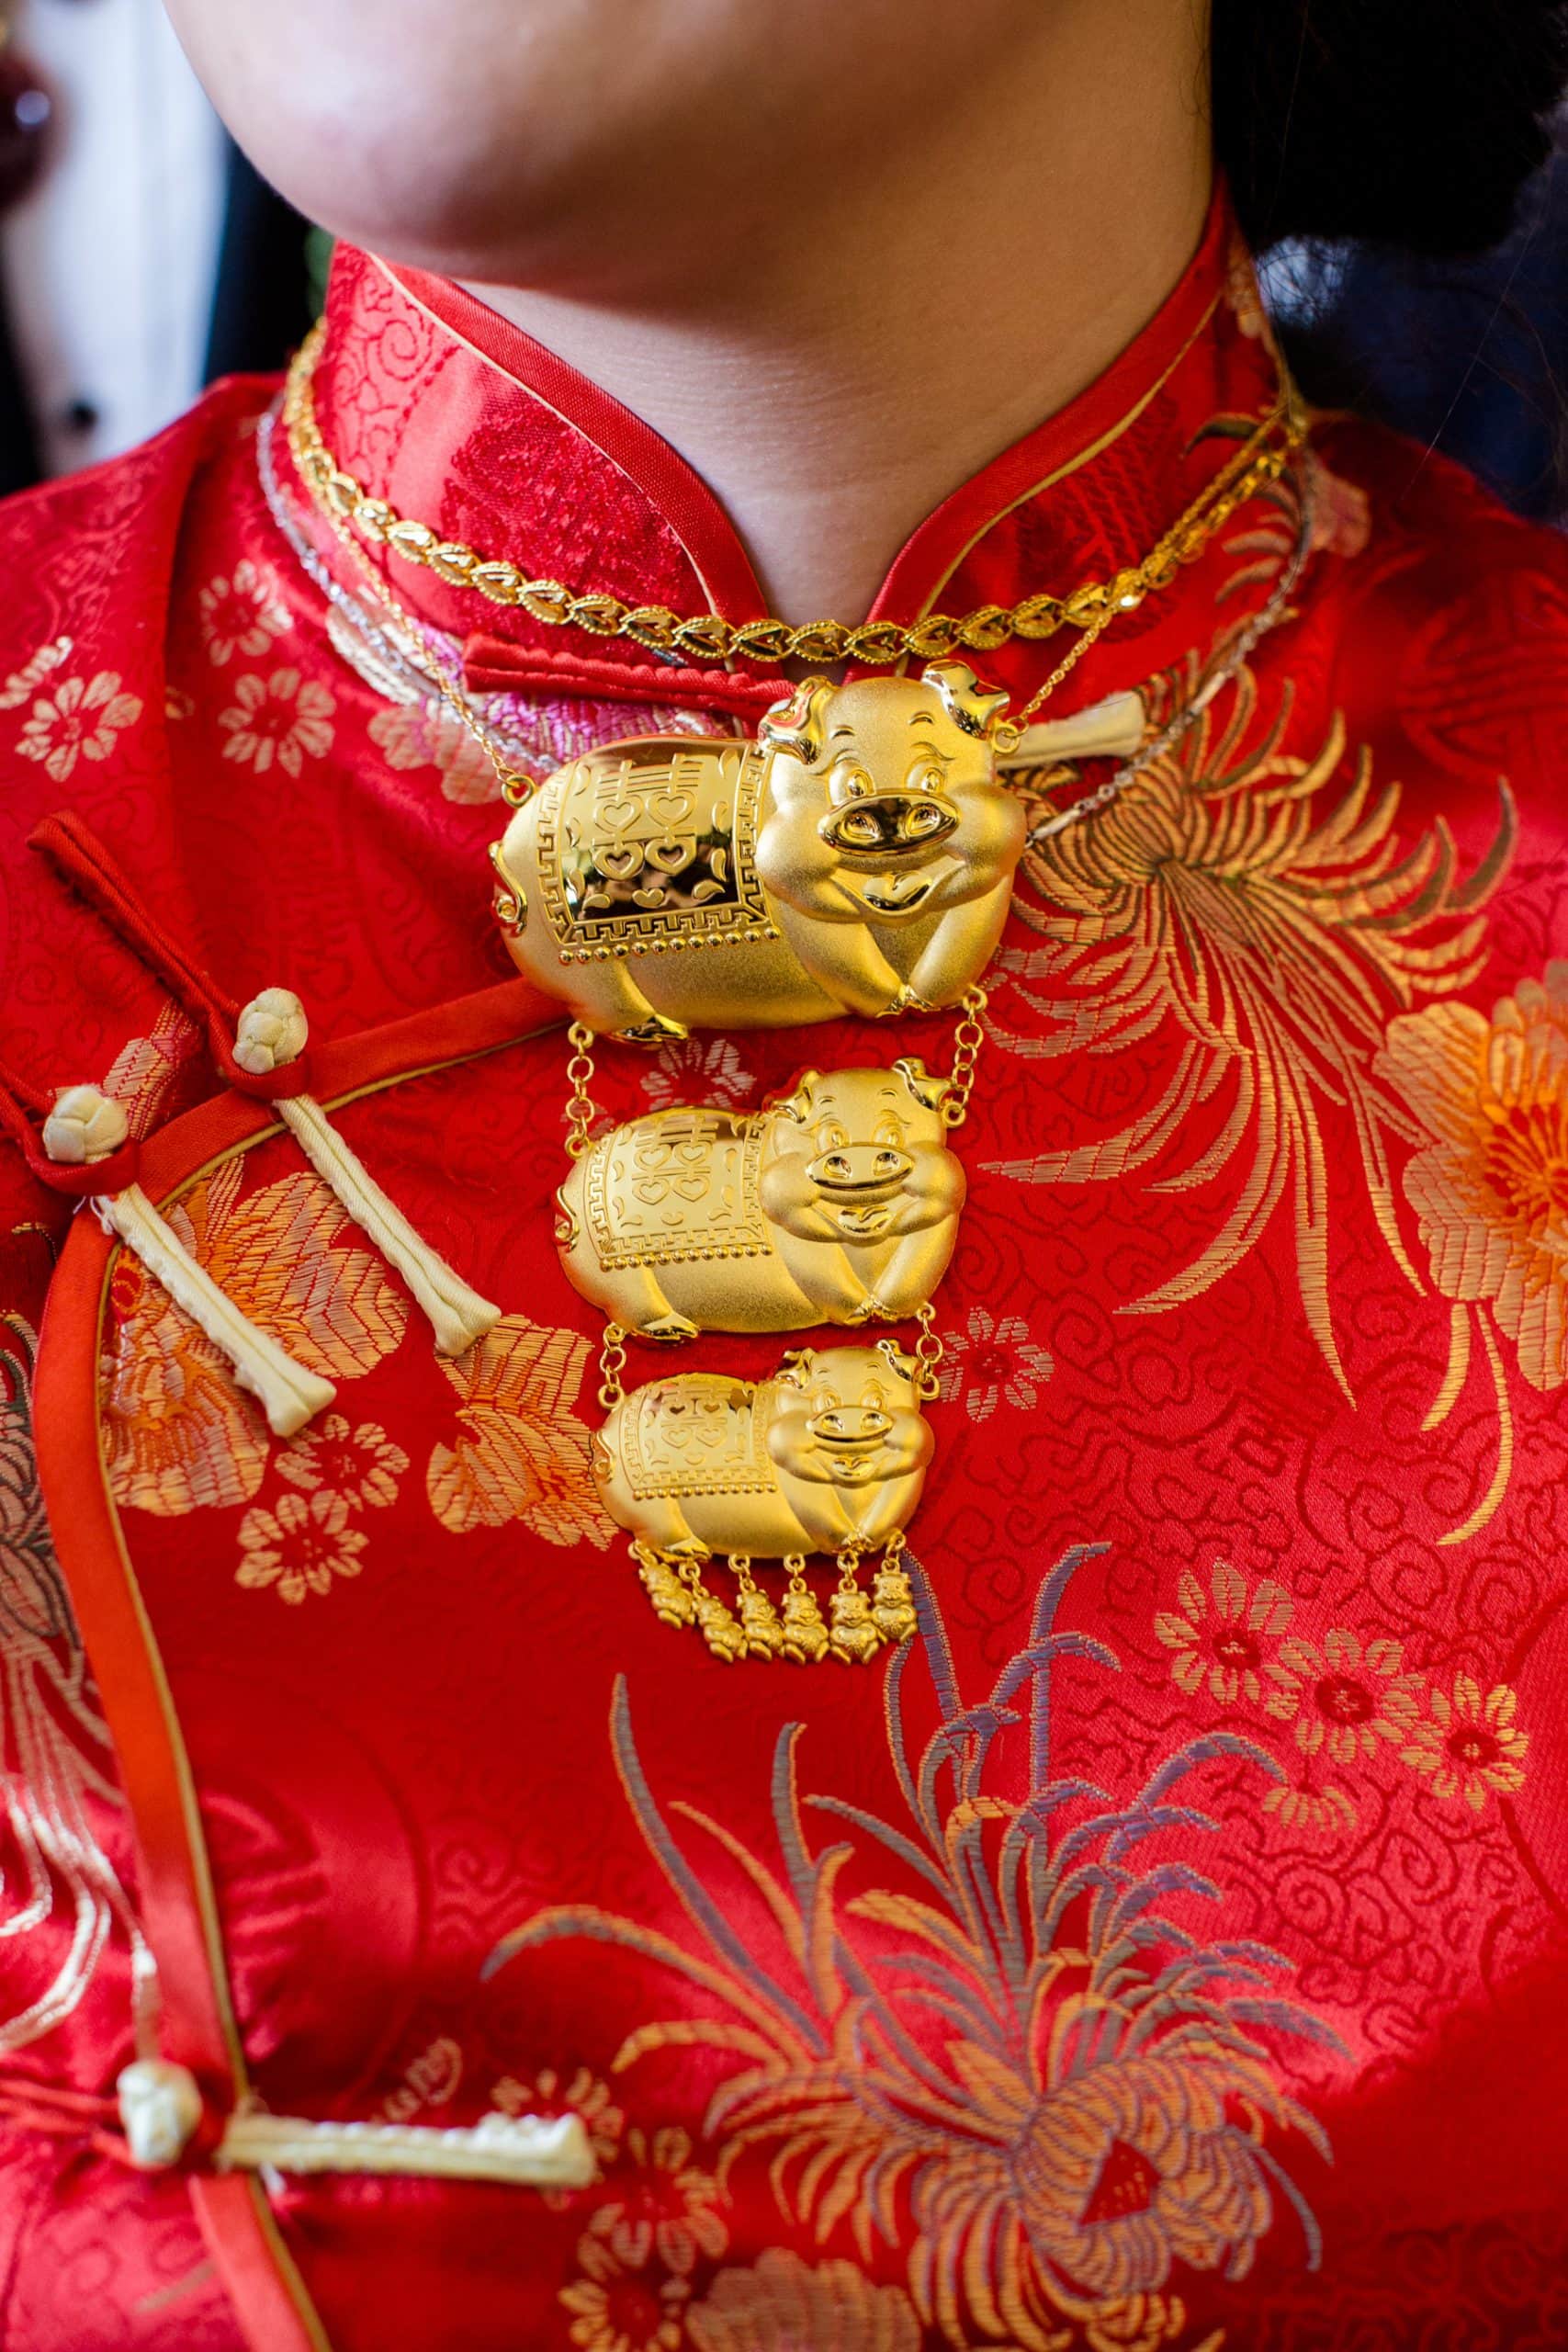 Detail of a gold pig necklace gift from tea ceremony